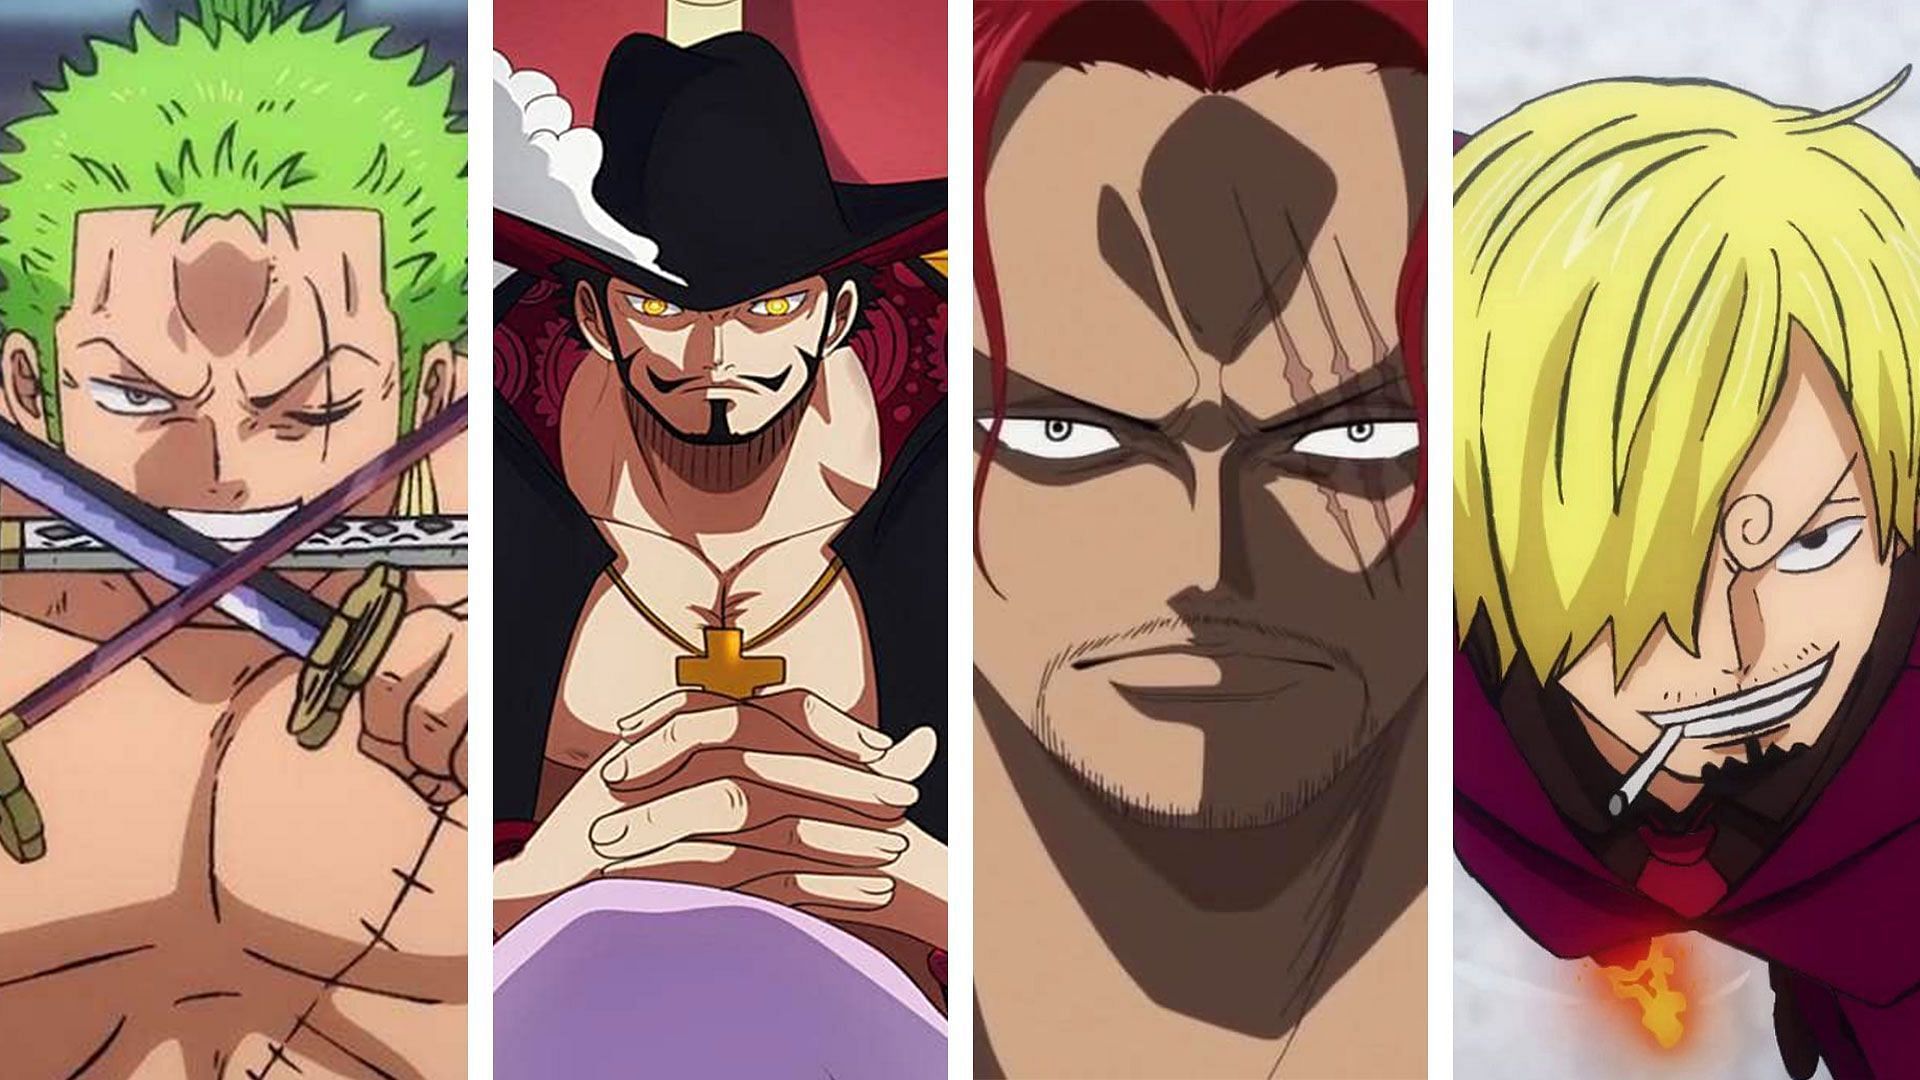 Mihawk and Shanks may be the talk of the town for One Piece fans, but Zoro and Sanji